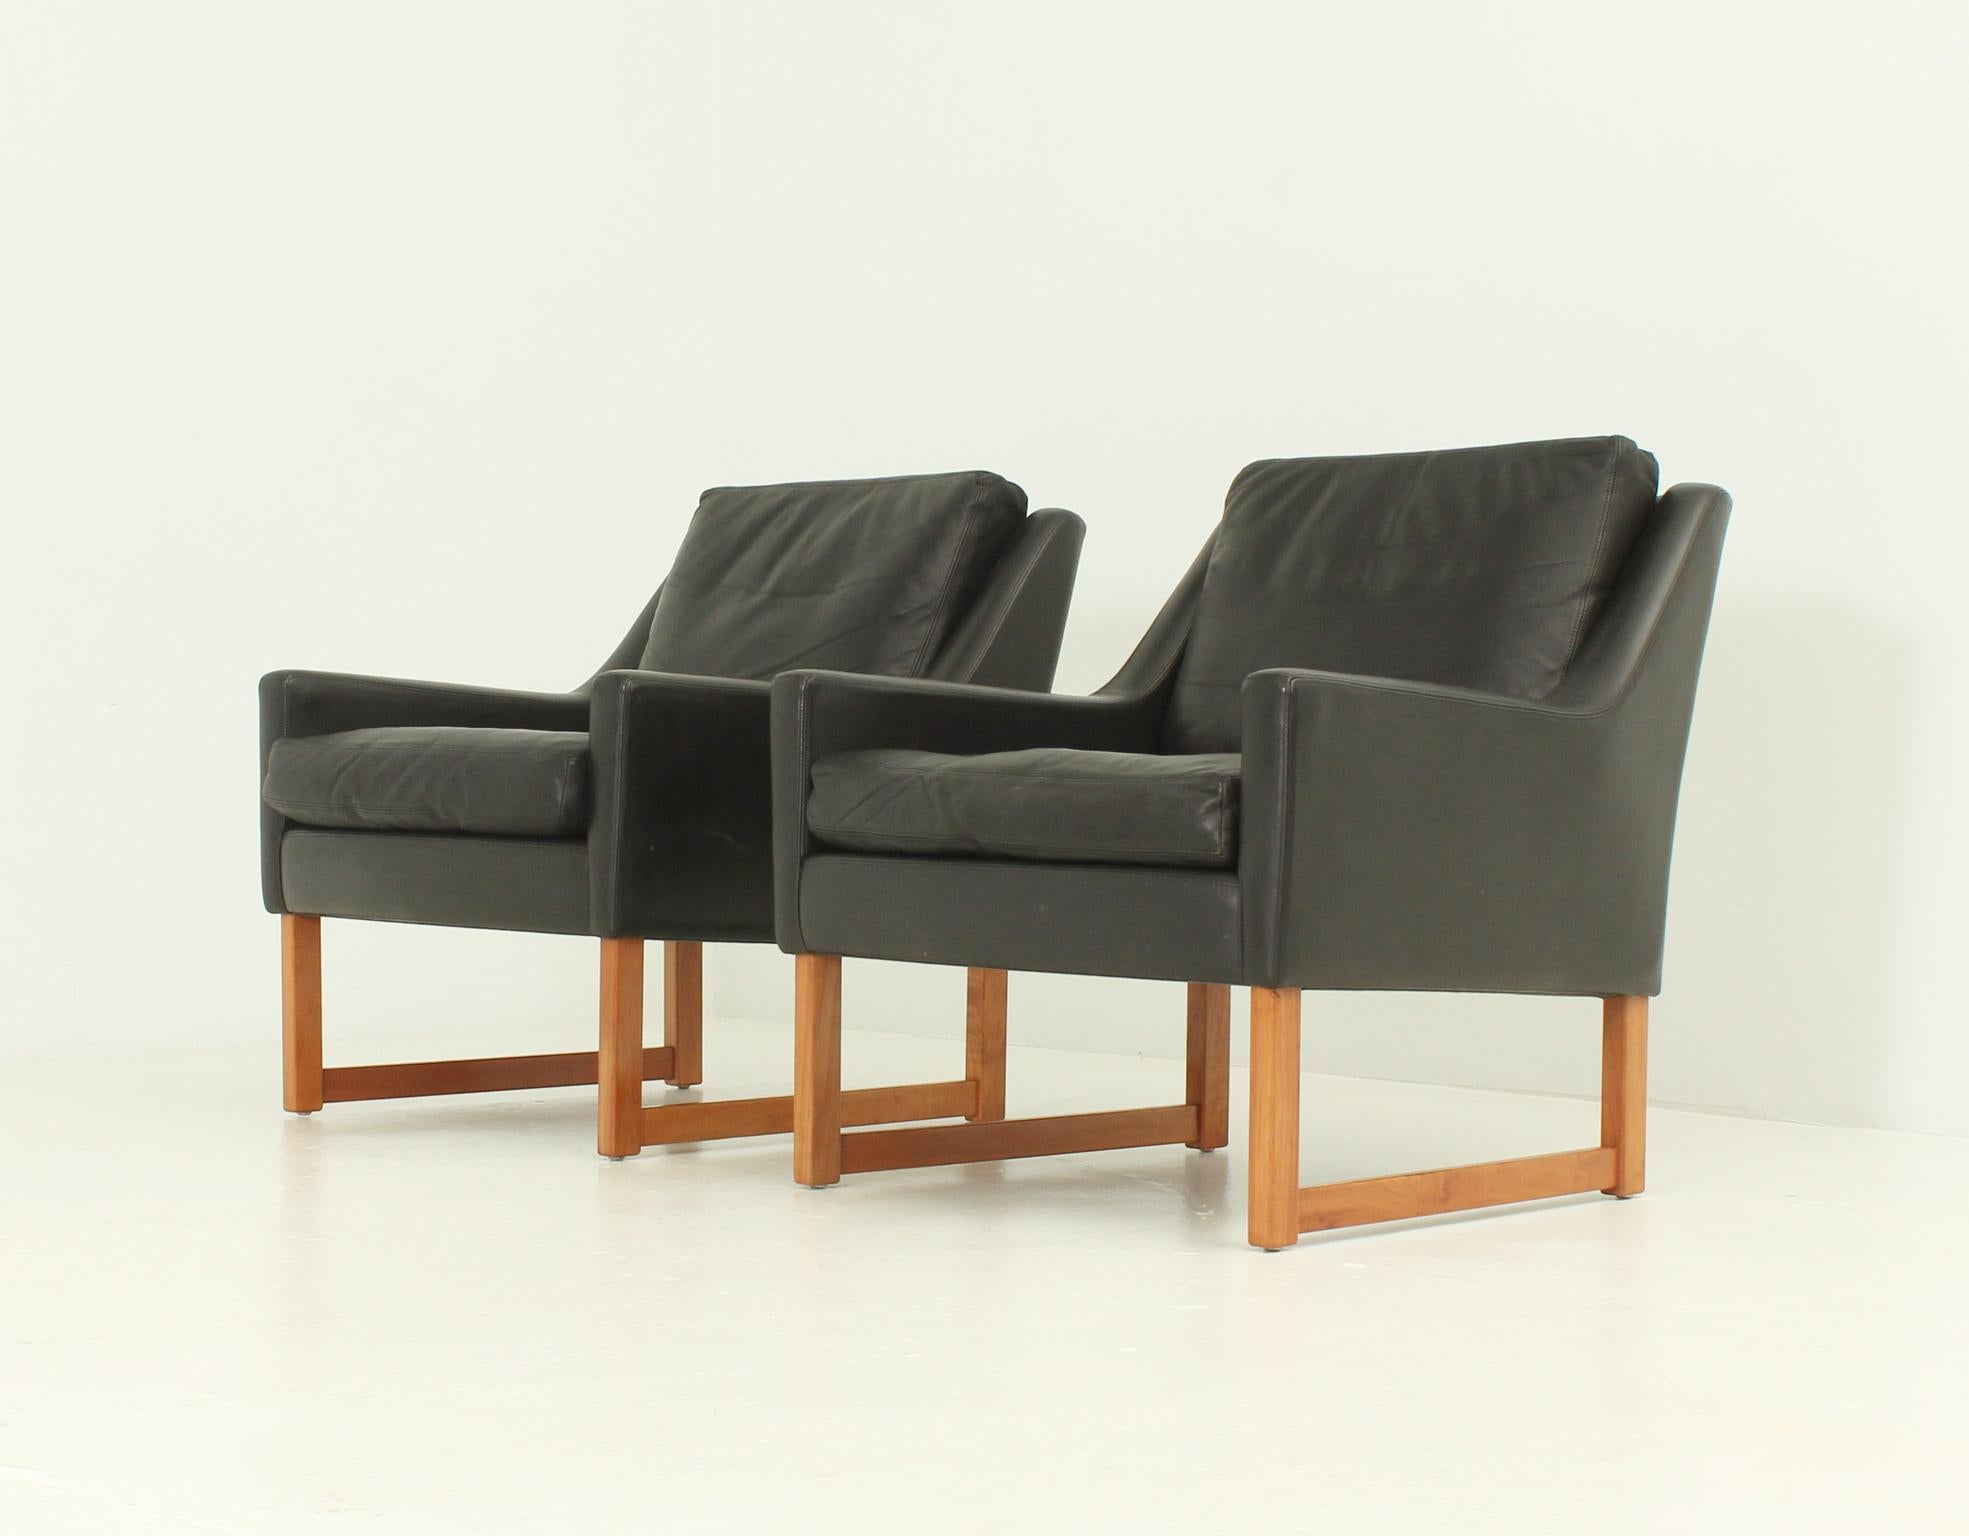 Pair of armchairs designed in 1960's by Rudolf Bernd Glatzel for Kill International, Germany. Wood frame upholstered with black aniline leather with loose cushions.